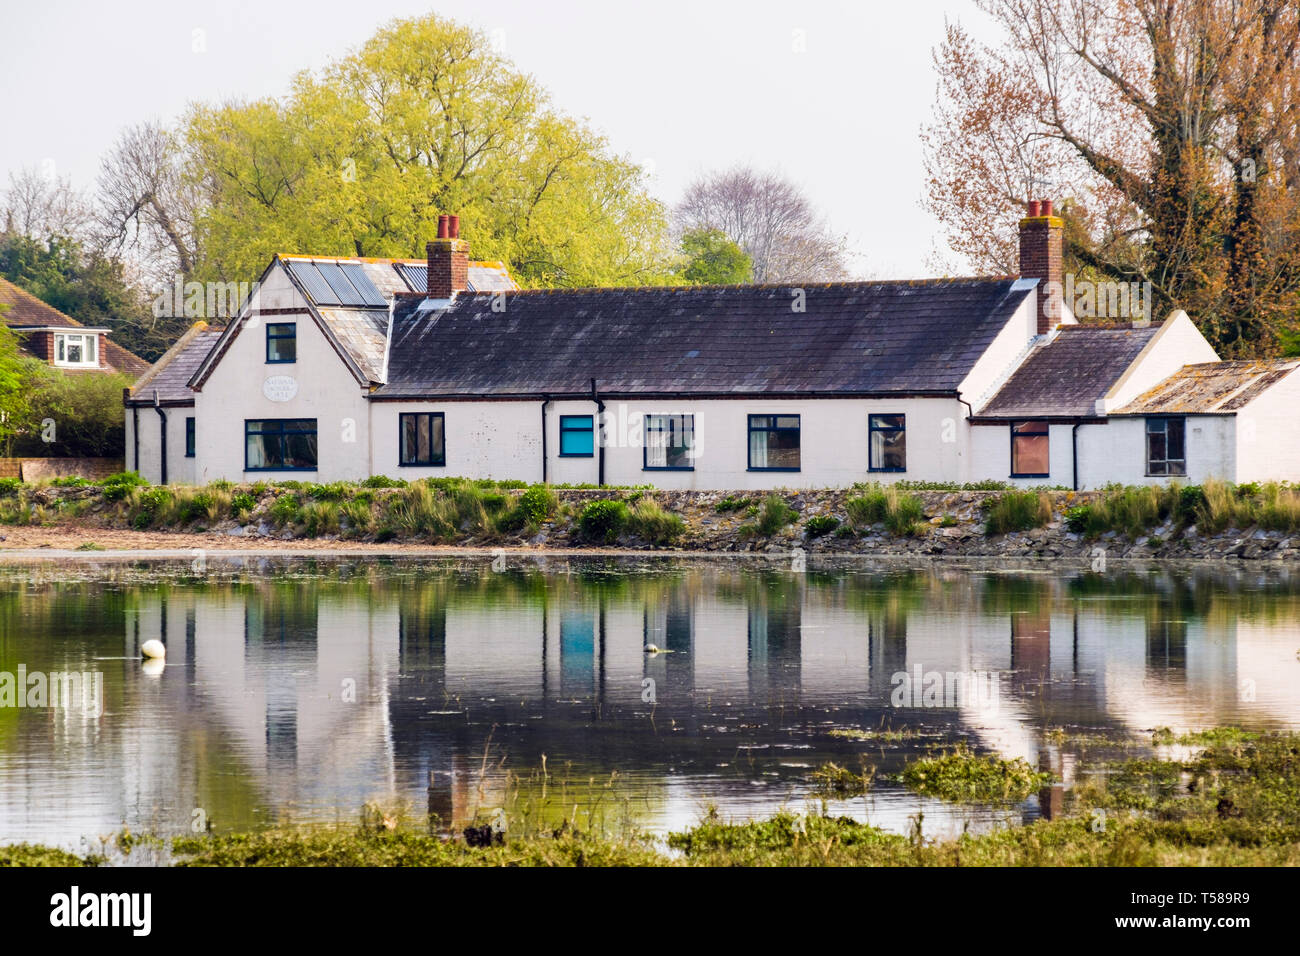 The National School 1834 converted into a house reflected in the creek at high tide. Bosham, Chichester, West Sussex, England, UK, Britain Stock Photo